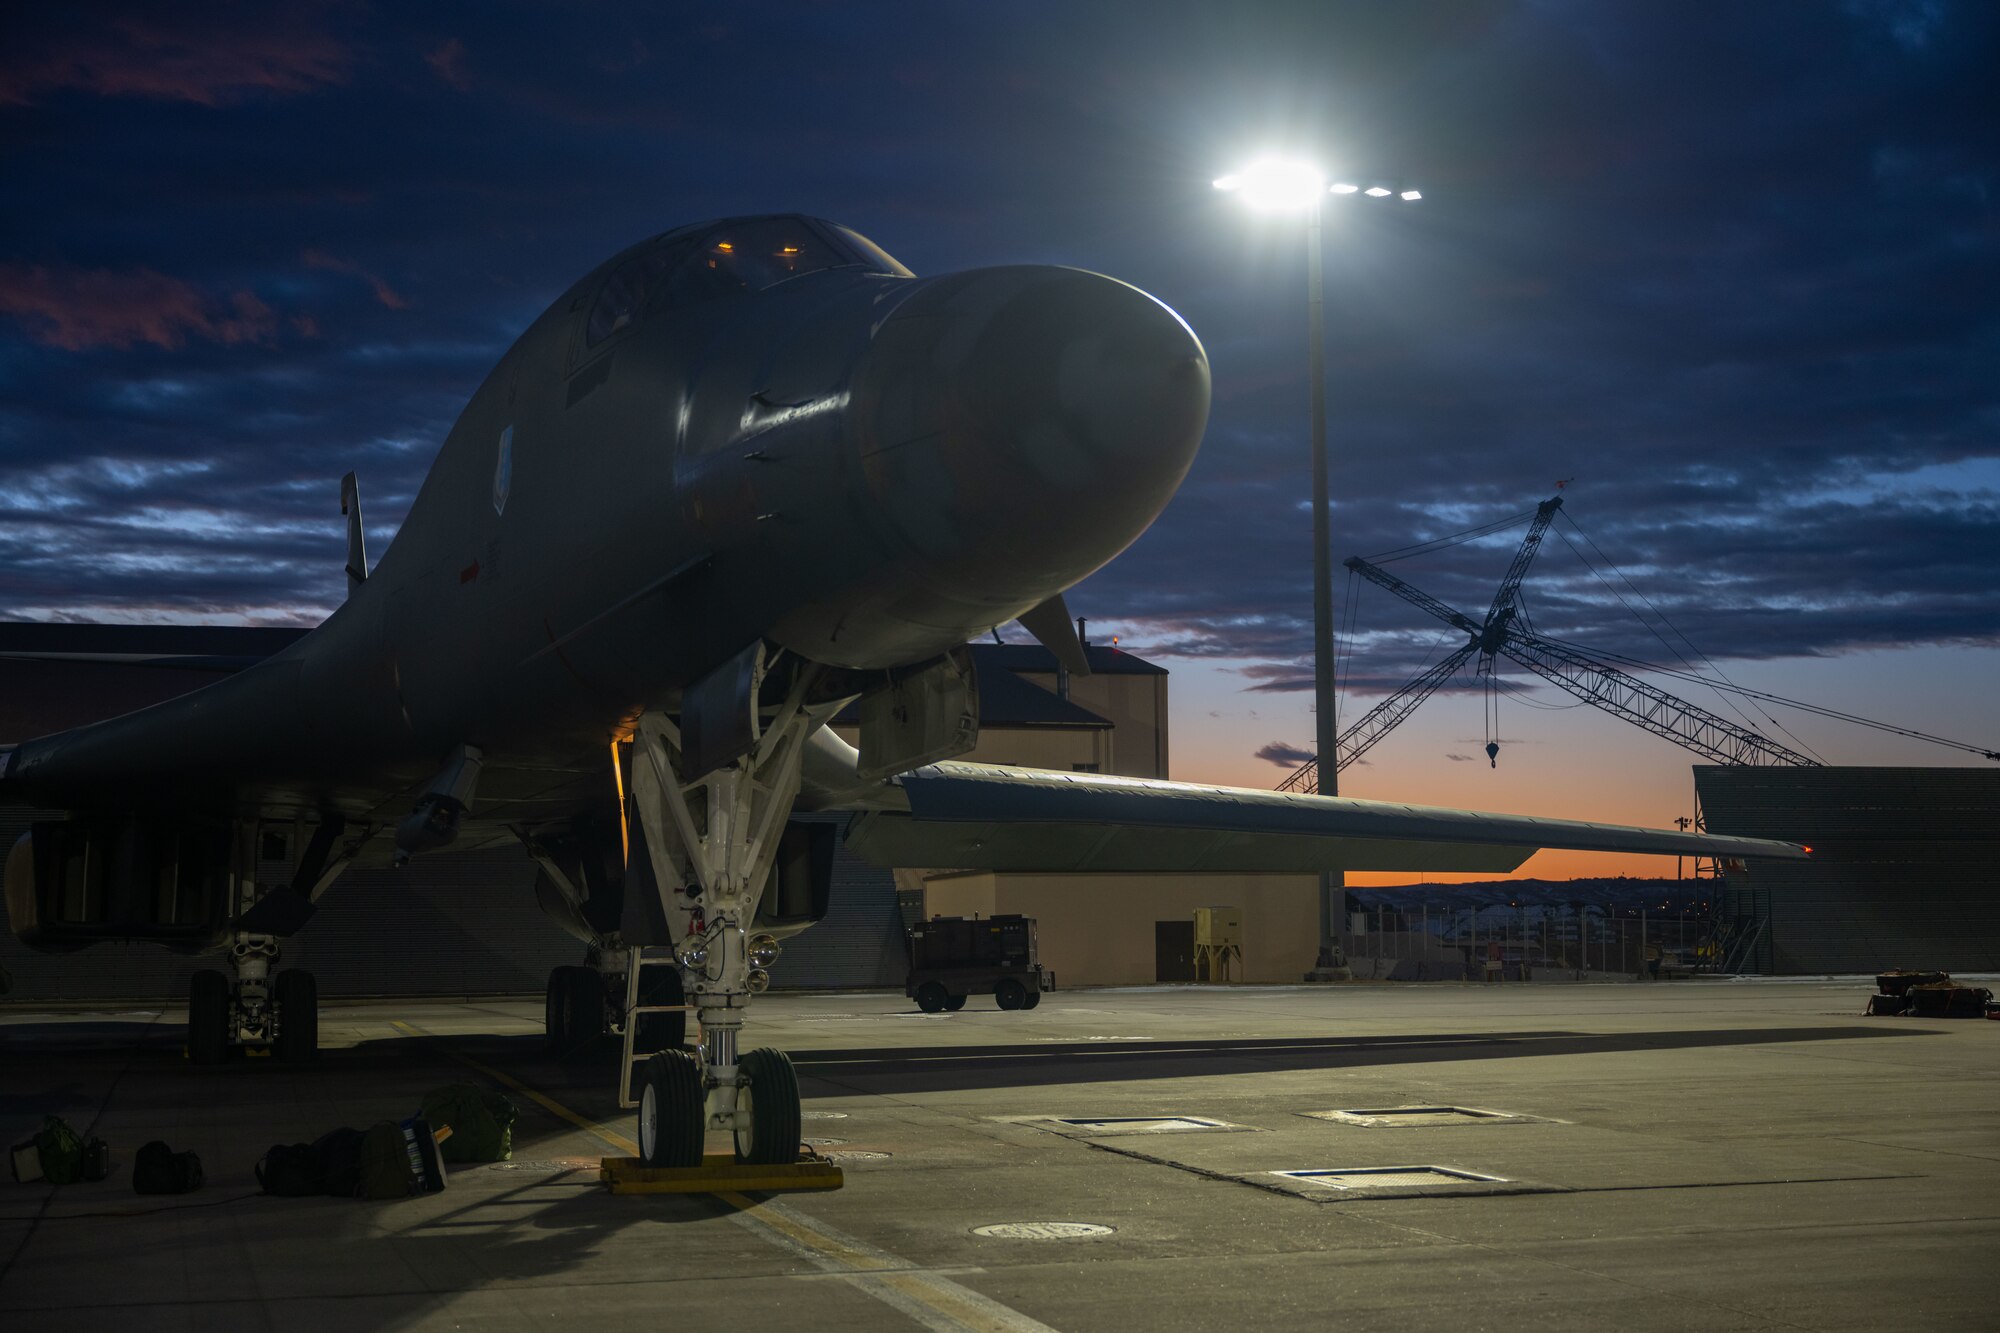 A B-1B Lancer sits prepared to embark to the Indo-Pacific for a CONUS-to-CONUS mission on the flightline at Ellsworth Air Force Base, South Dakota, Jan. 9, 2023. The U.S. is committed to upholding a rules-based, free and open Indo-Pacific that protects the sovereignty of every nation, ensures the peaceful resolution of disputes without coercion, promotes free, fair and reciprocal trade, and preserves freedom of navigation. (U.S. Air Force photo by Airman 1st Class Adam Olson)